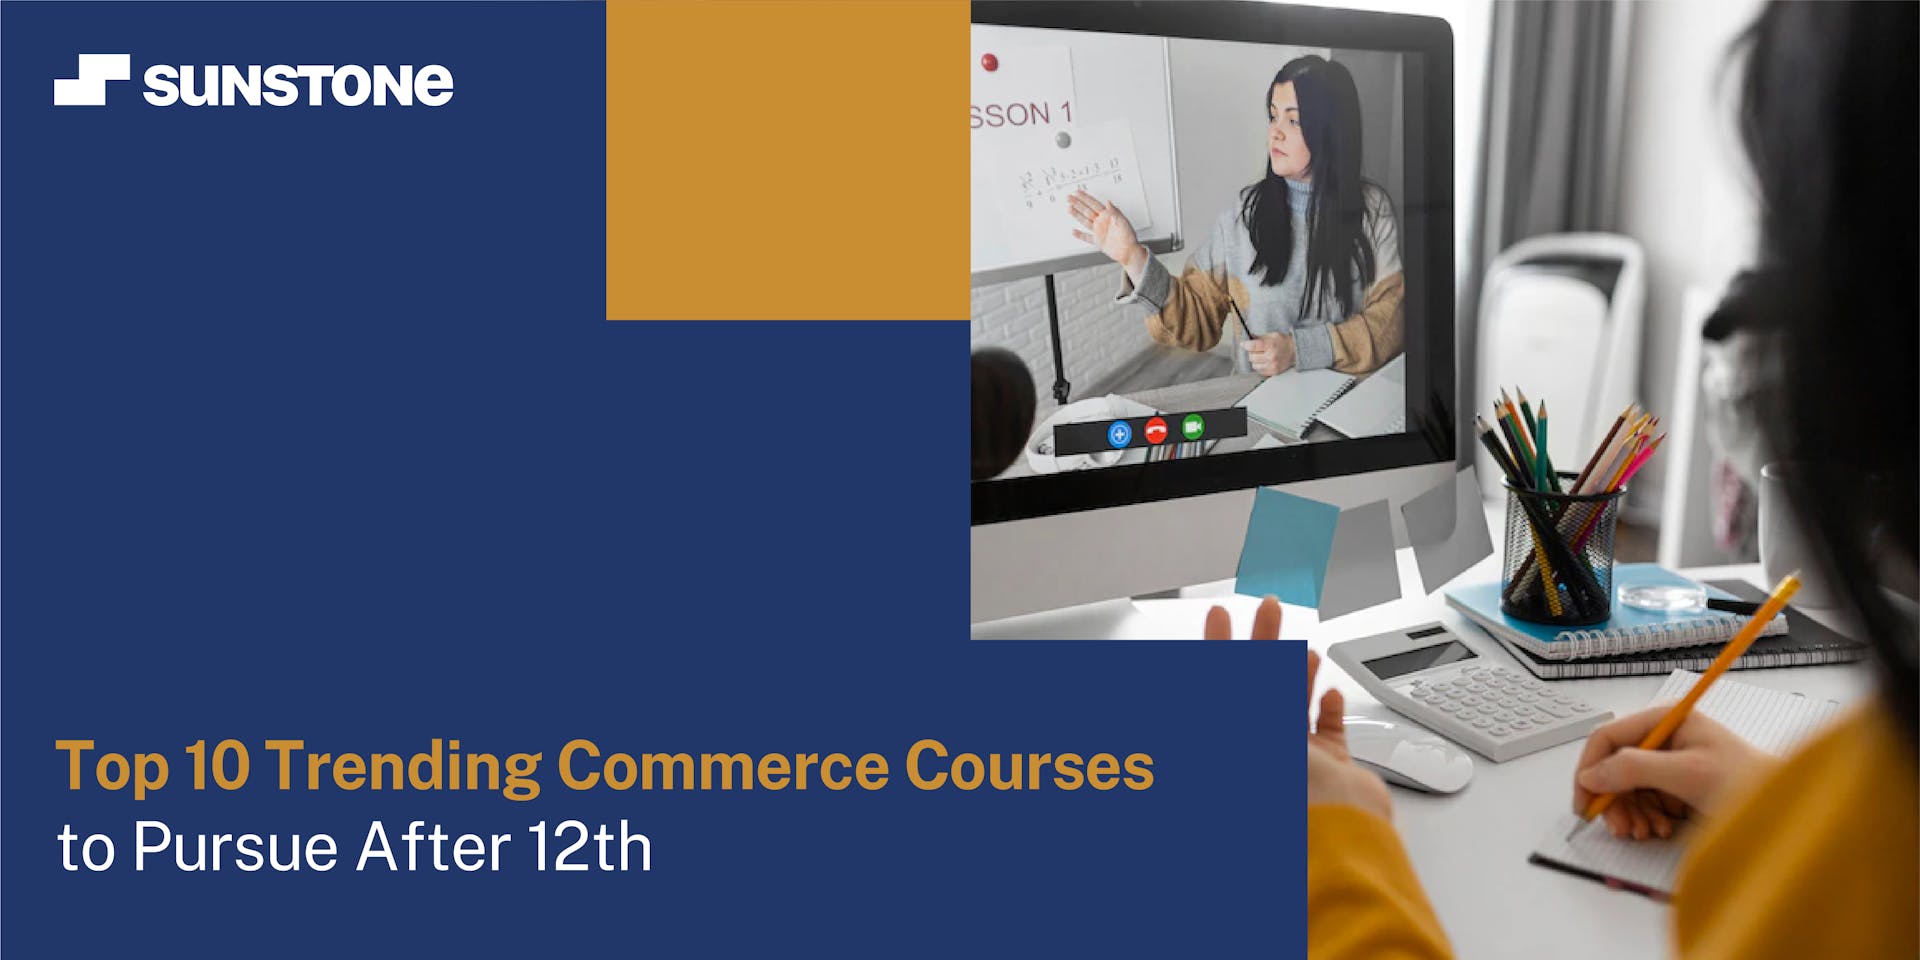 Top 10 Trending Courses in Commerce to Pursue After 12th